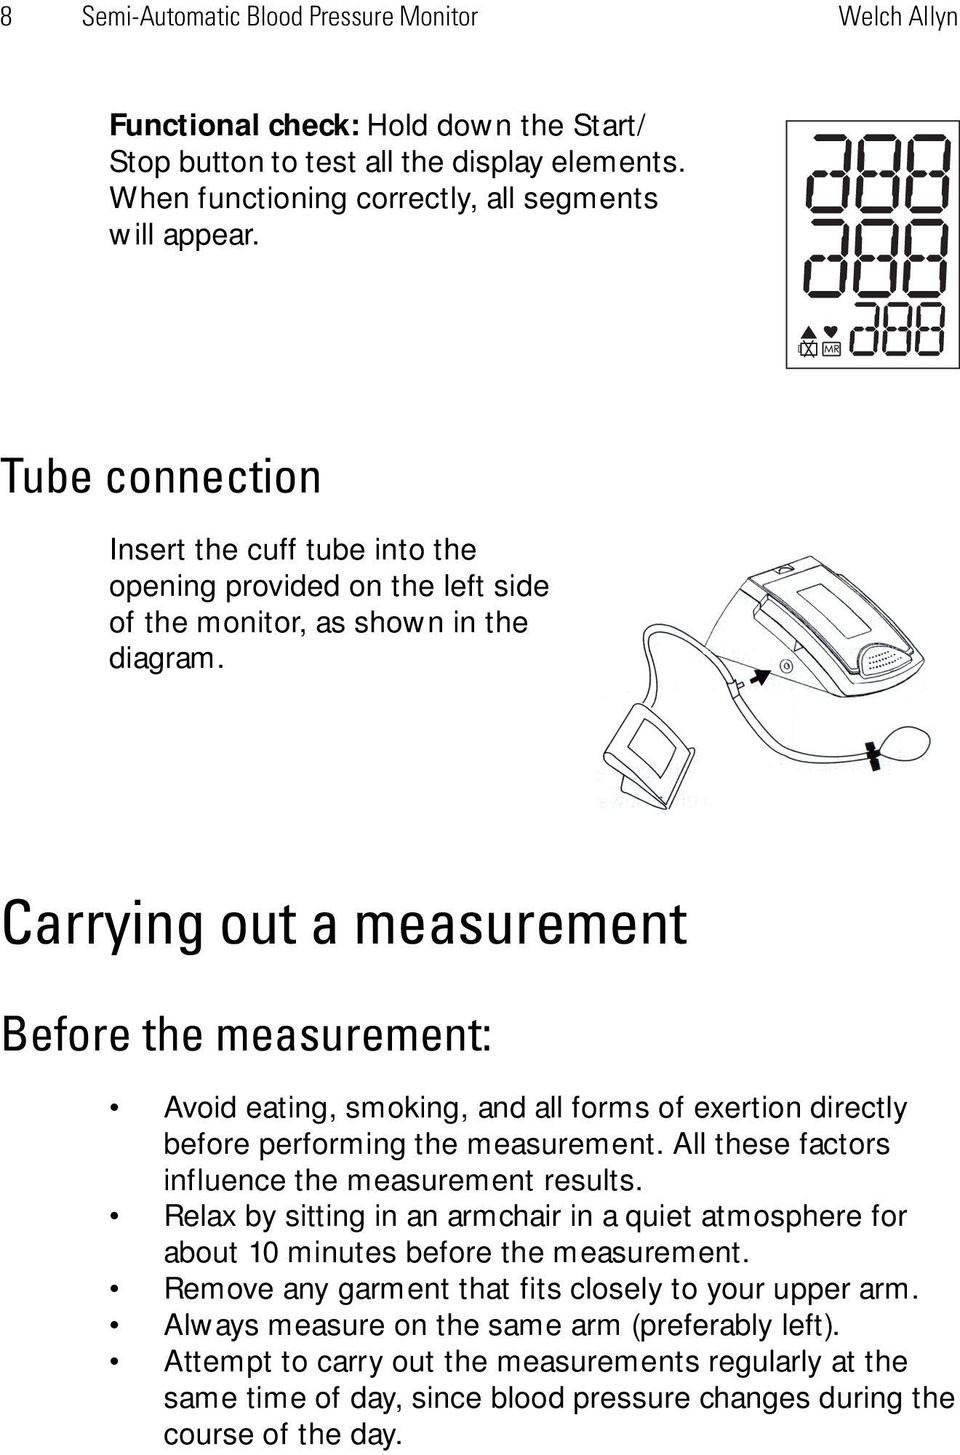 Carrying out a measurement Before the measurement: Avoid eating, smoking, and all forms of exertion directly before performing the measurement. All these factors influence the measurement results.